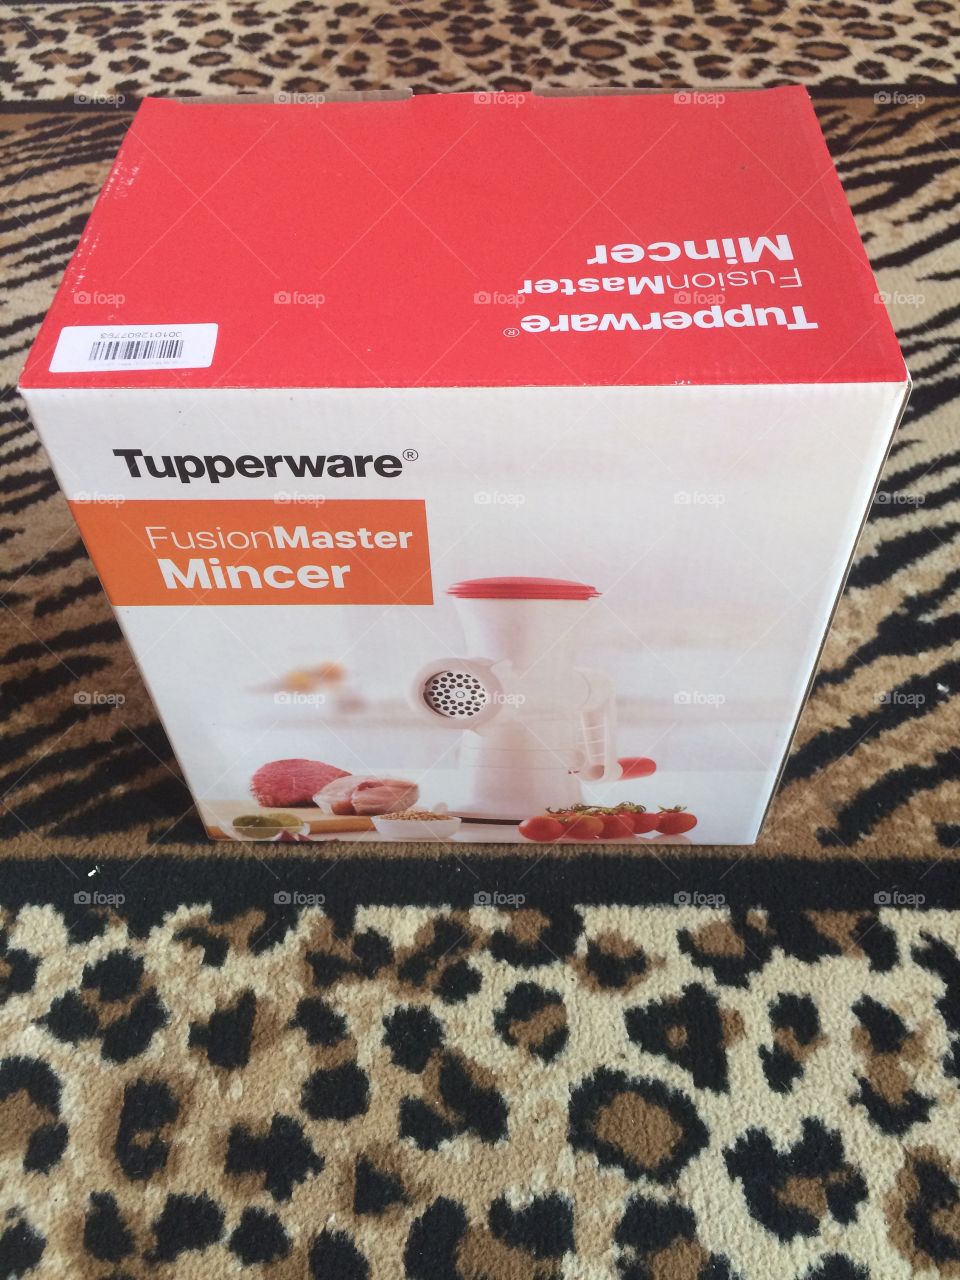 Tupperware FusionMaster Mincer ...